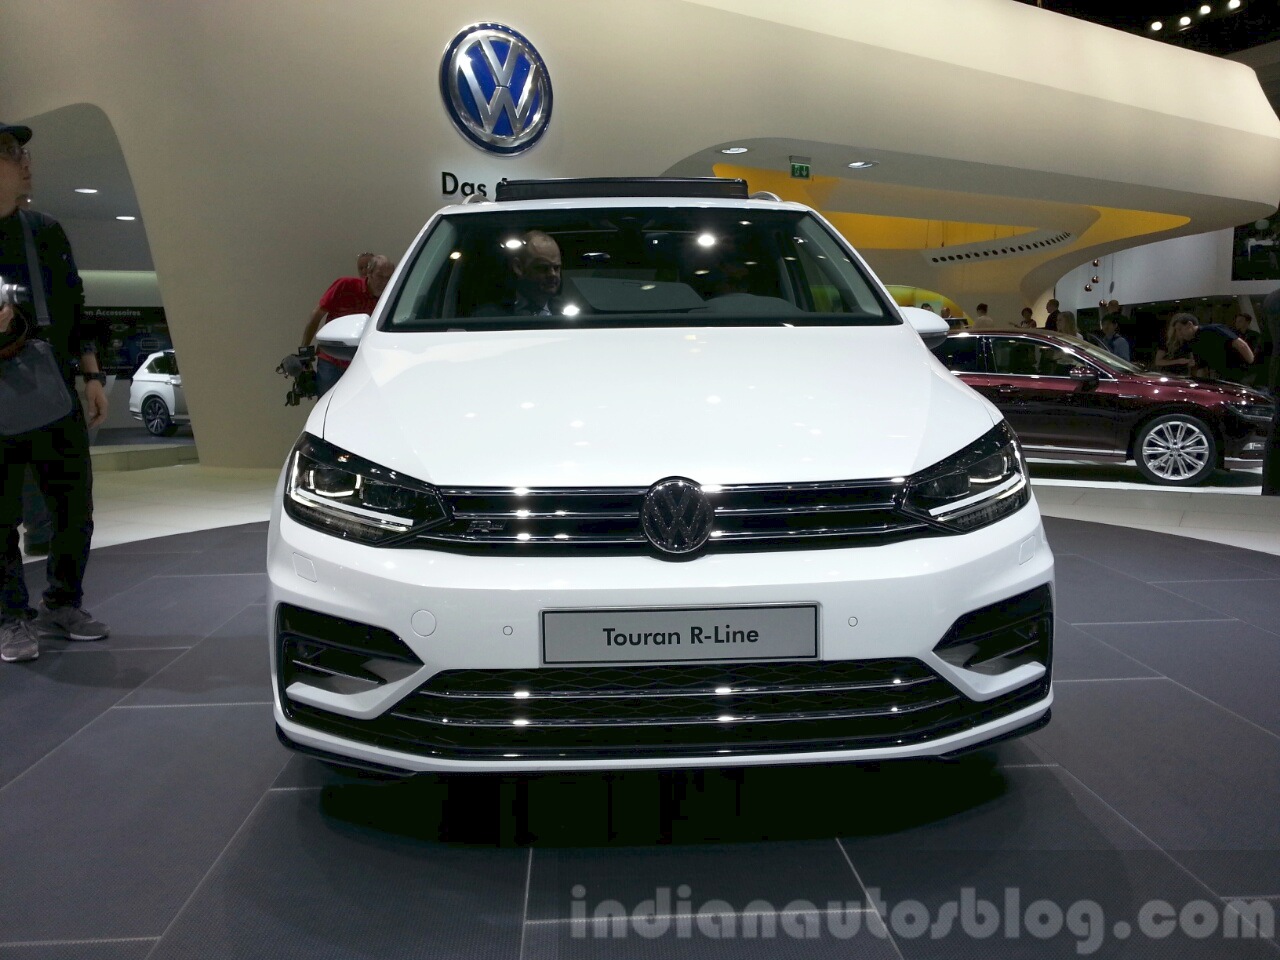 It's Official: All-New VW Touran Based On MQB Platform [w/Video]